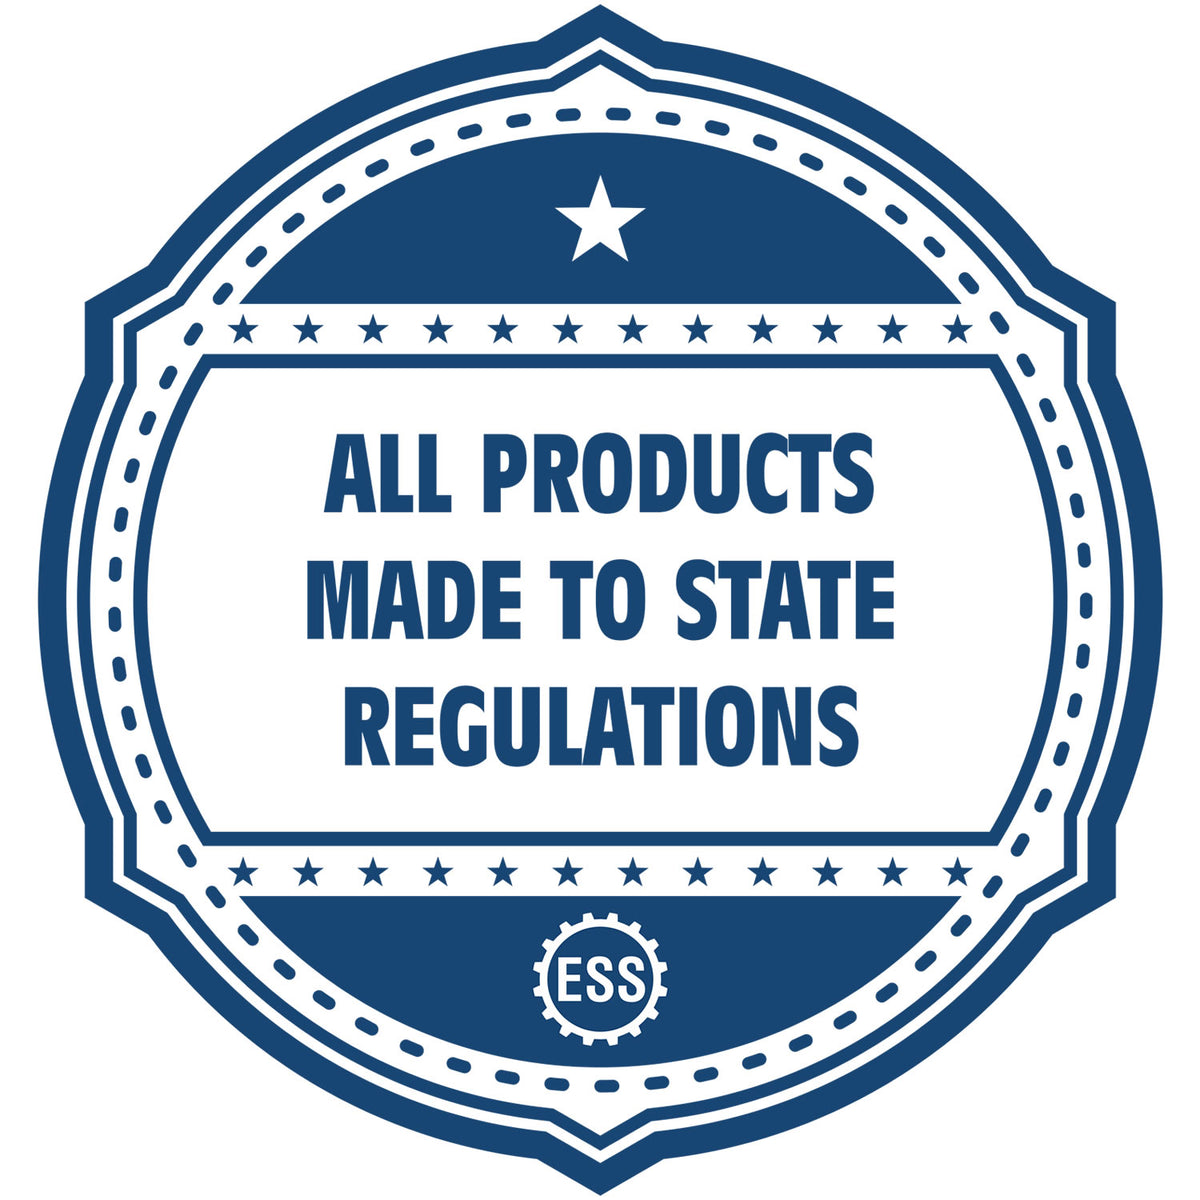 An icon or badge element for the Wooden Handle Pennsylvania Rectangular Notary Public Stamp showing that this product is made in compliance with state regulations.